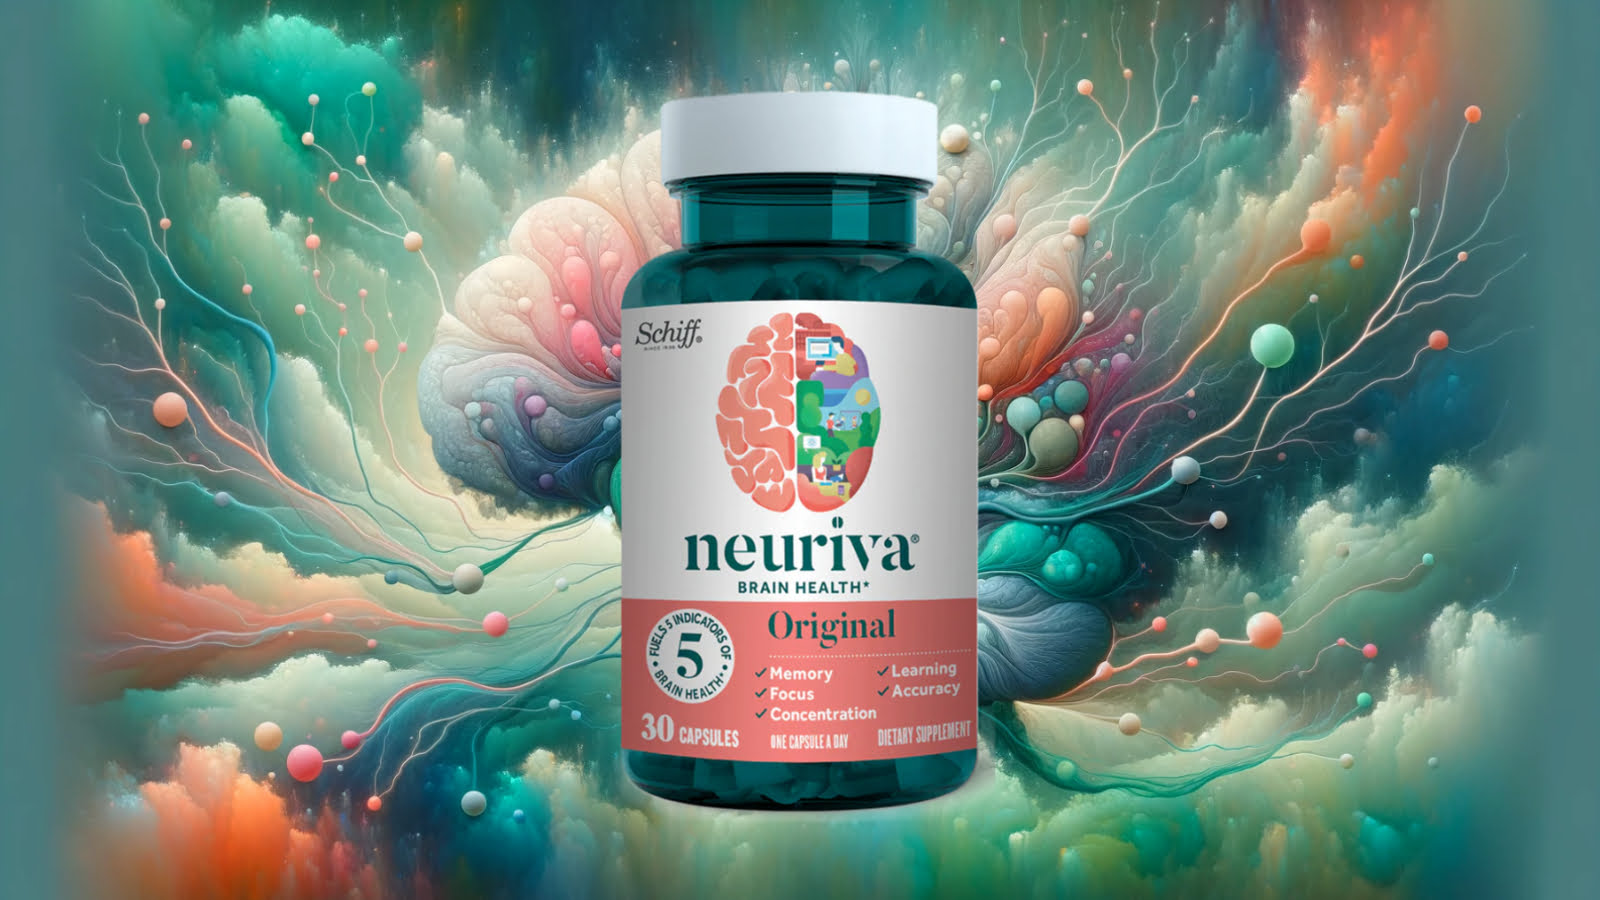 Overview of Neuriva's ingredients, their effects on the brain, and possible alternatives